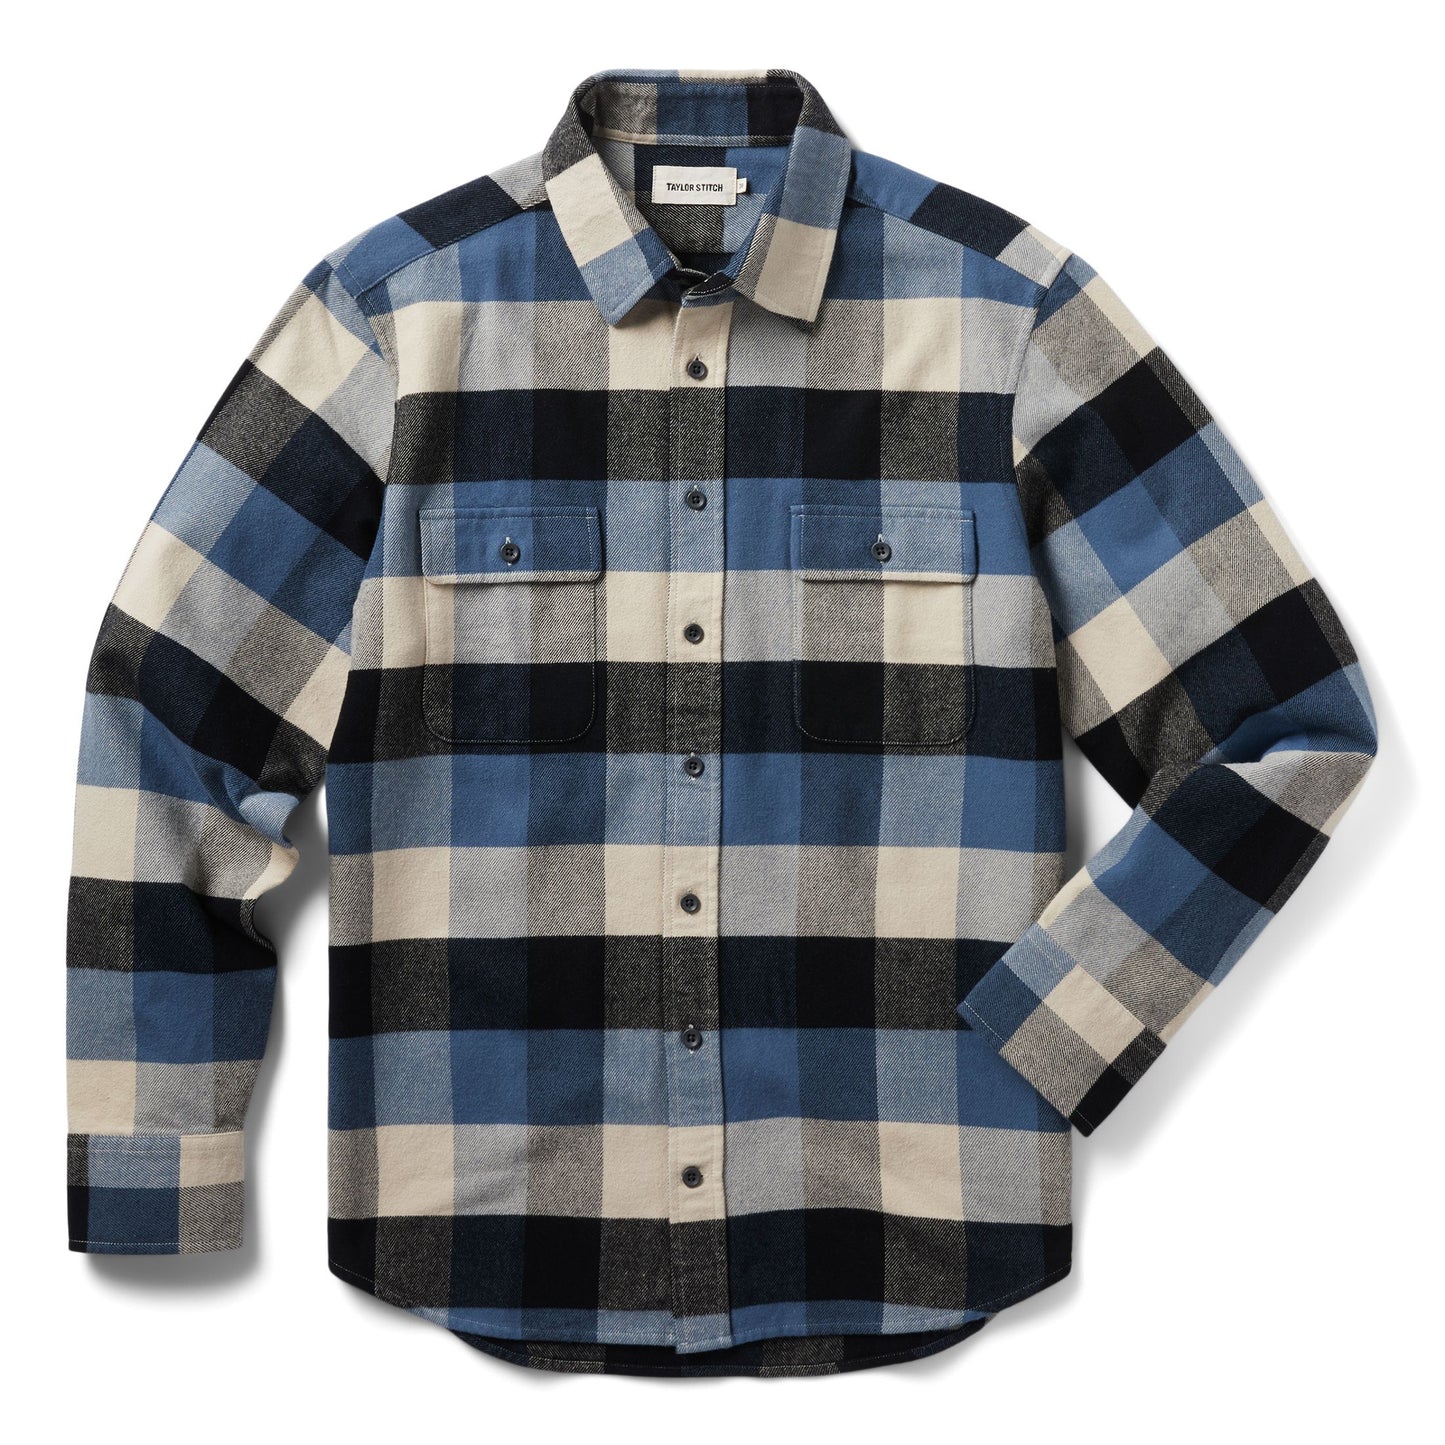 The Yosemite Shirt in Icicle Check